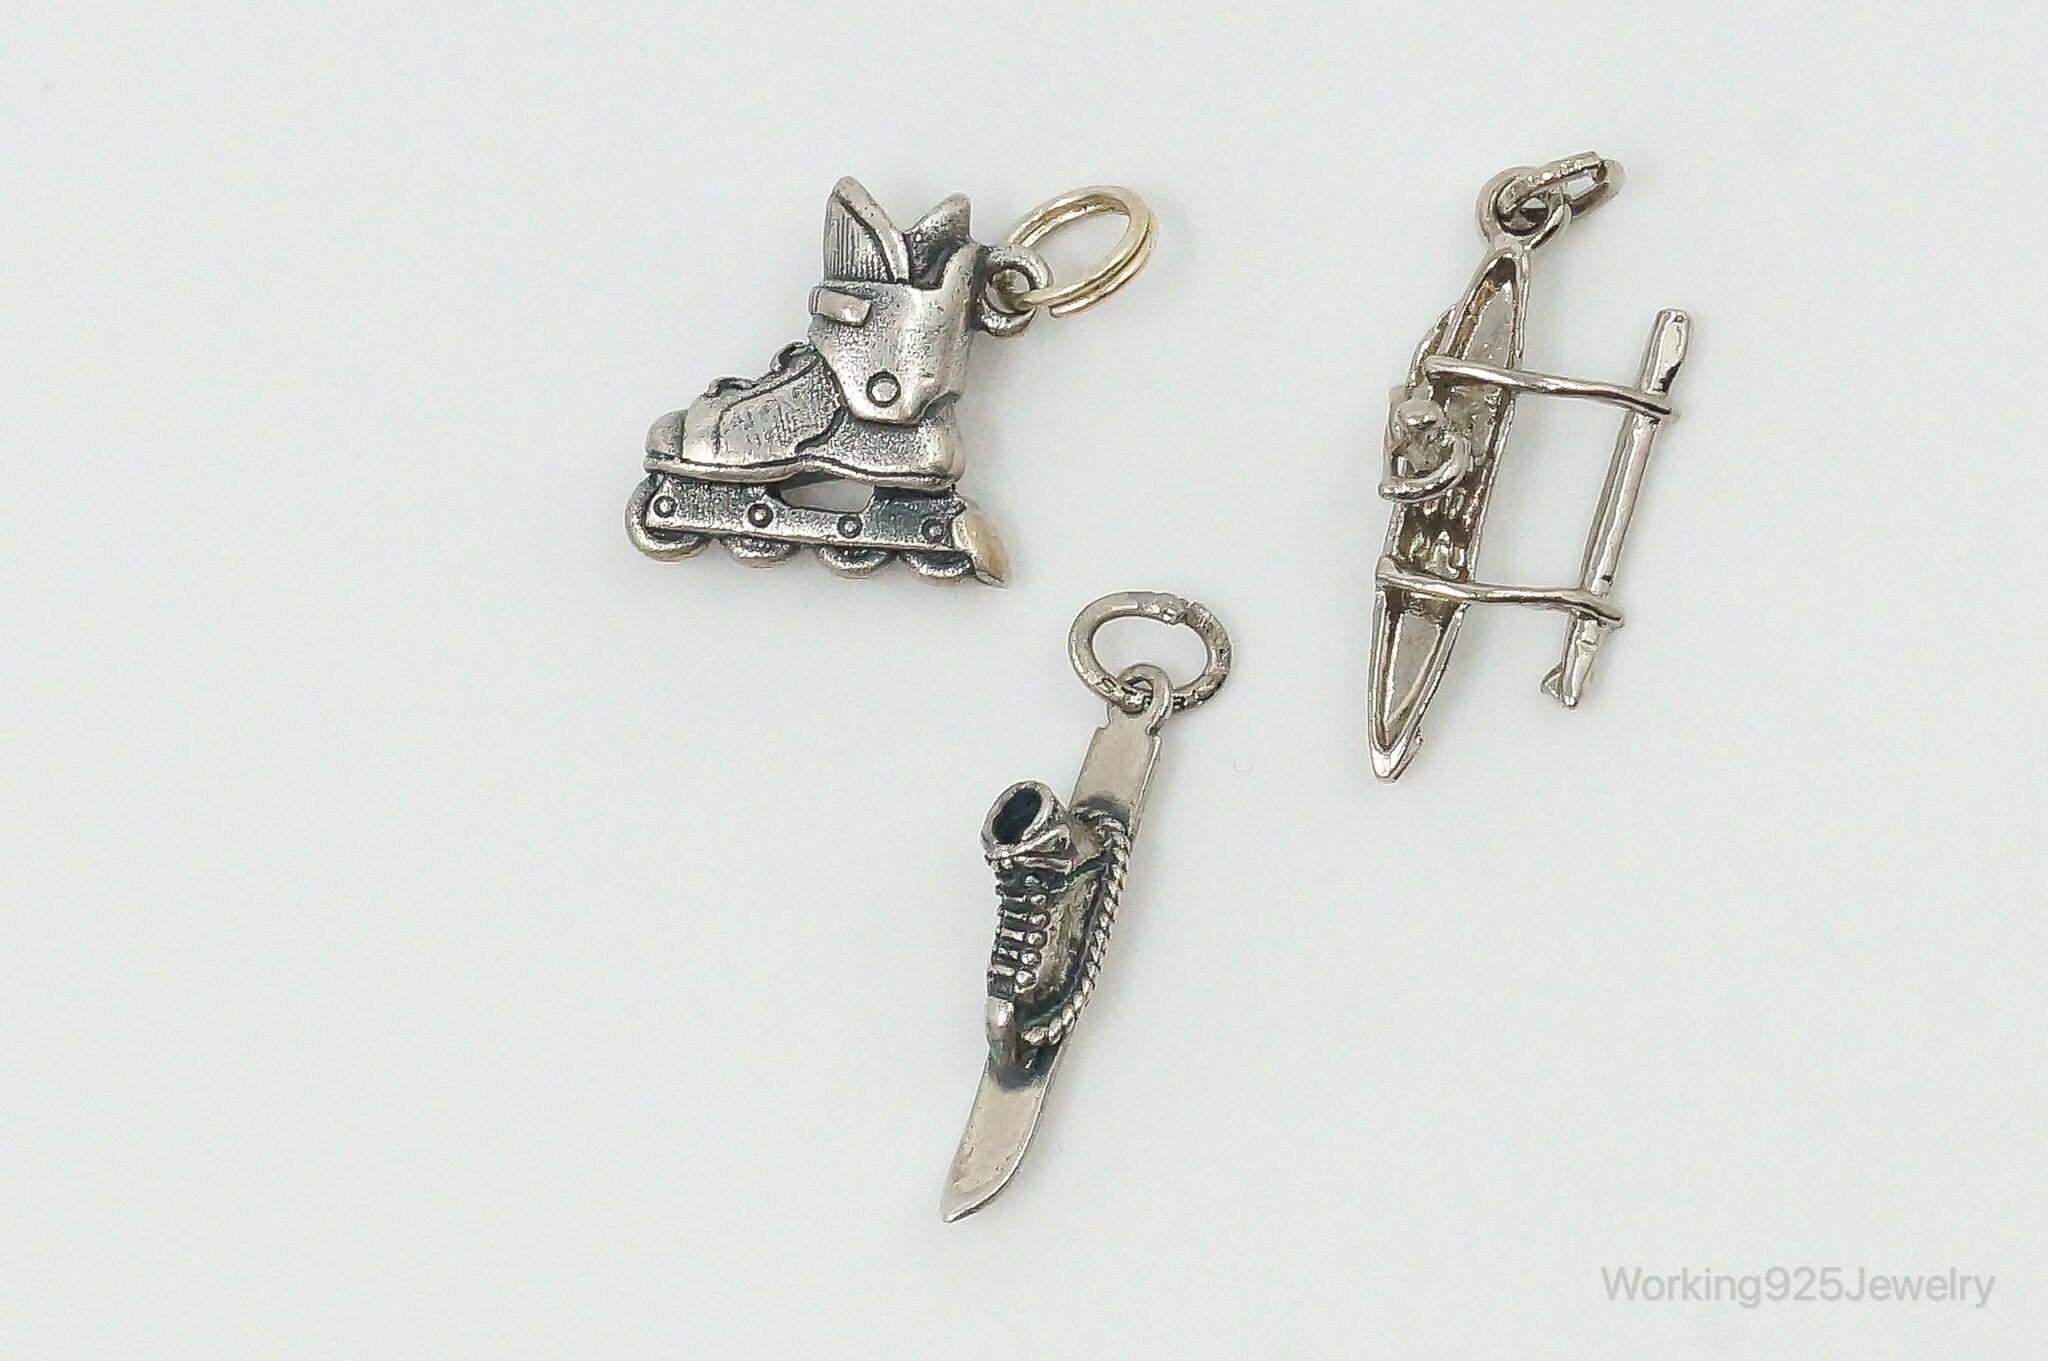 Vintage Hobbies Sterling Silver Charms Lot